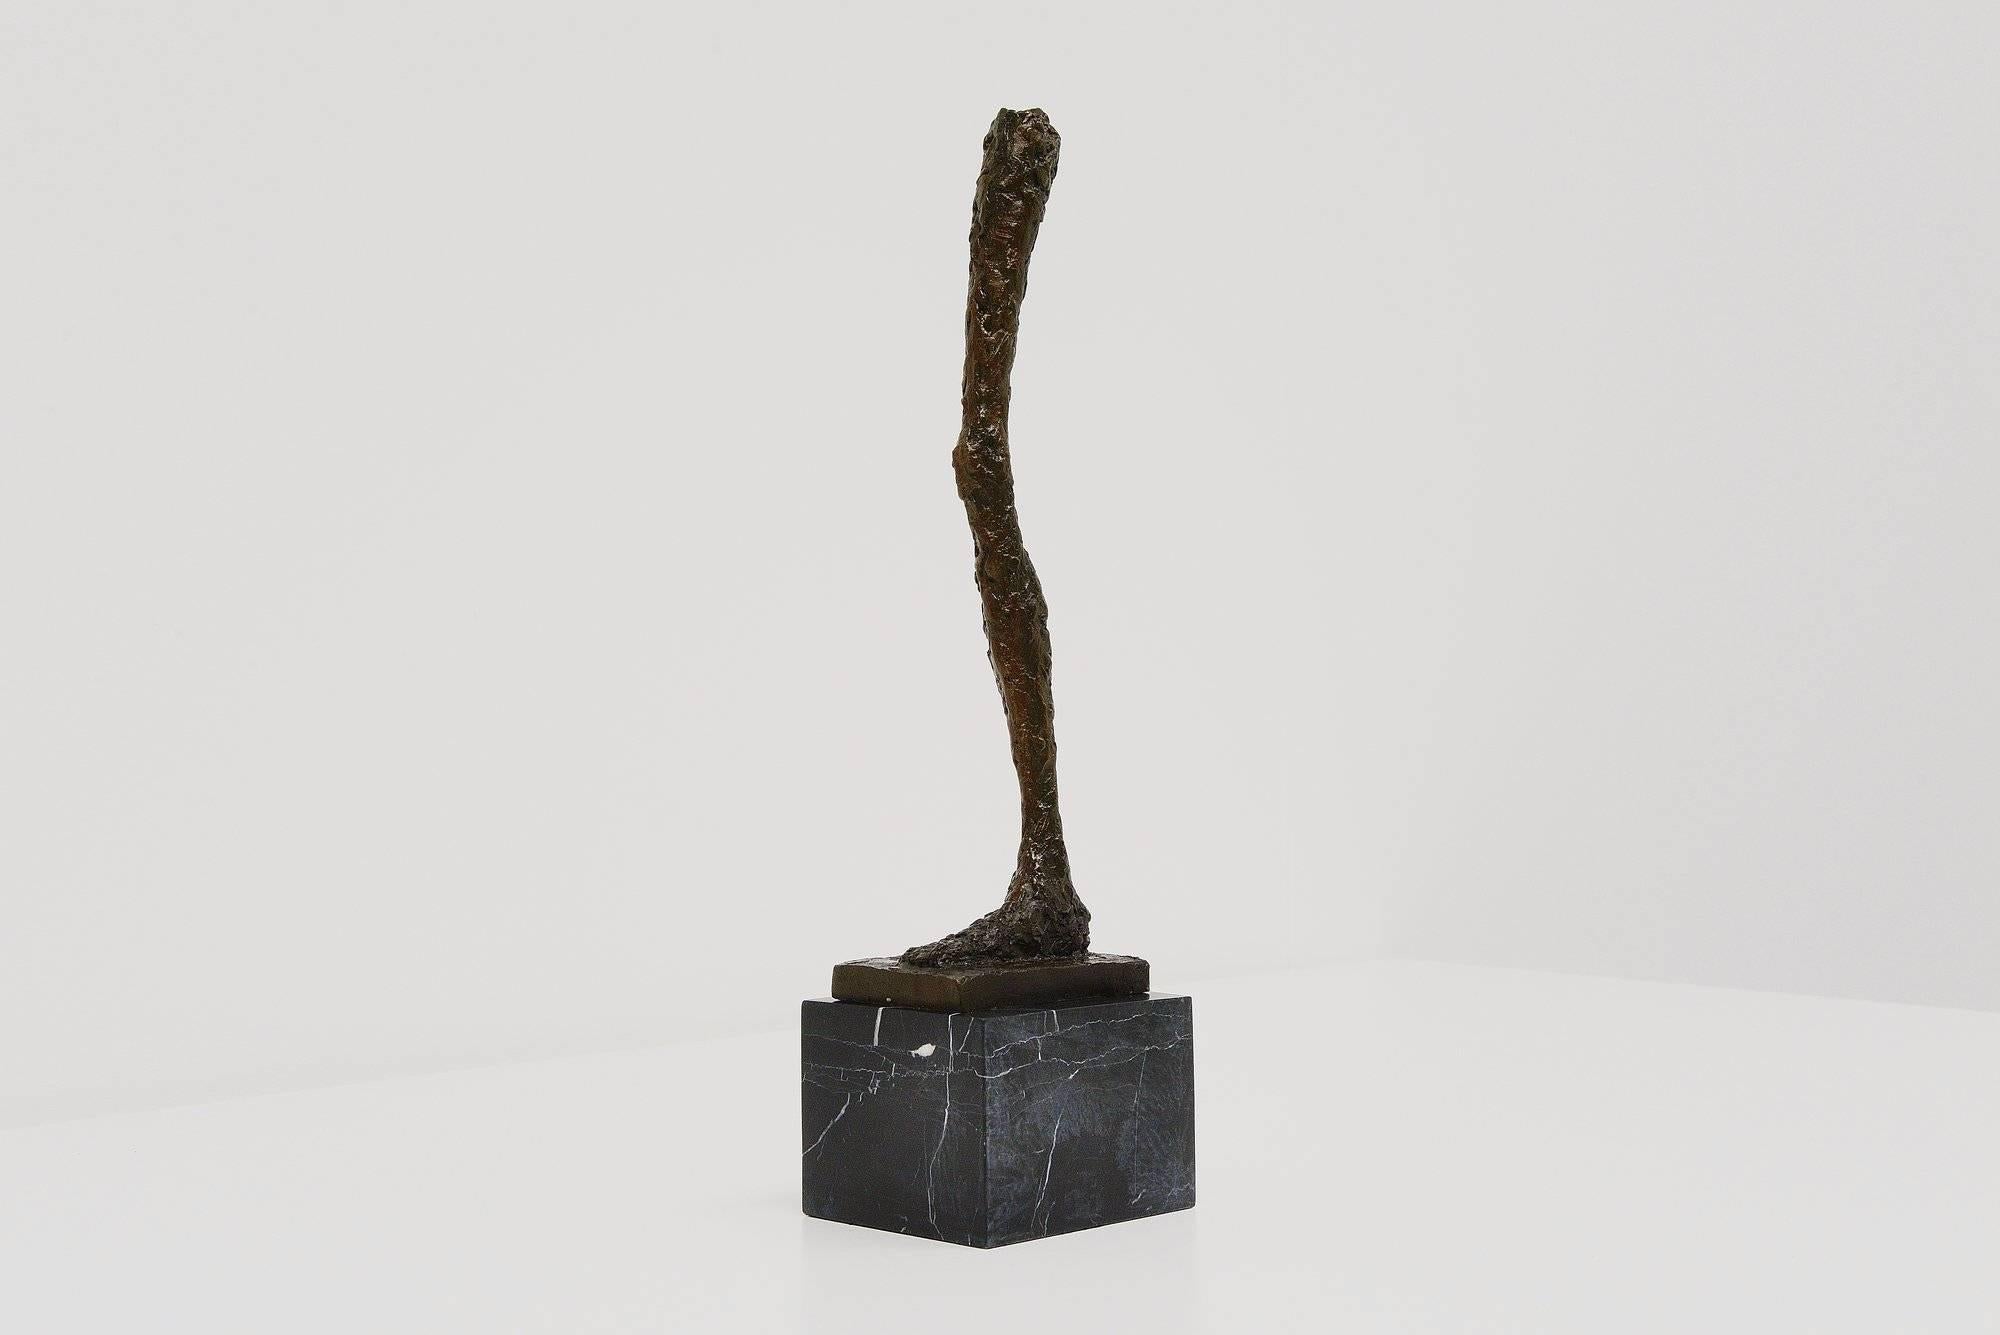 Very nice abstract modern bronze leg shaped sculpture in the style of Alberto Giacometti. This sculpture was made and most probably inspired by the work of Giacometti as many others did after him. This leg is made of solid bronze and has a very nice